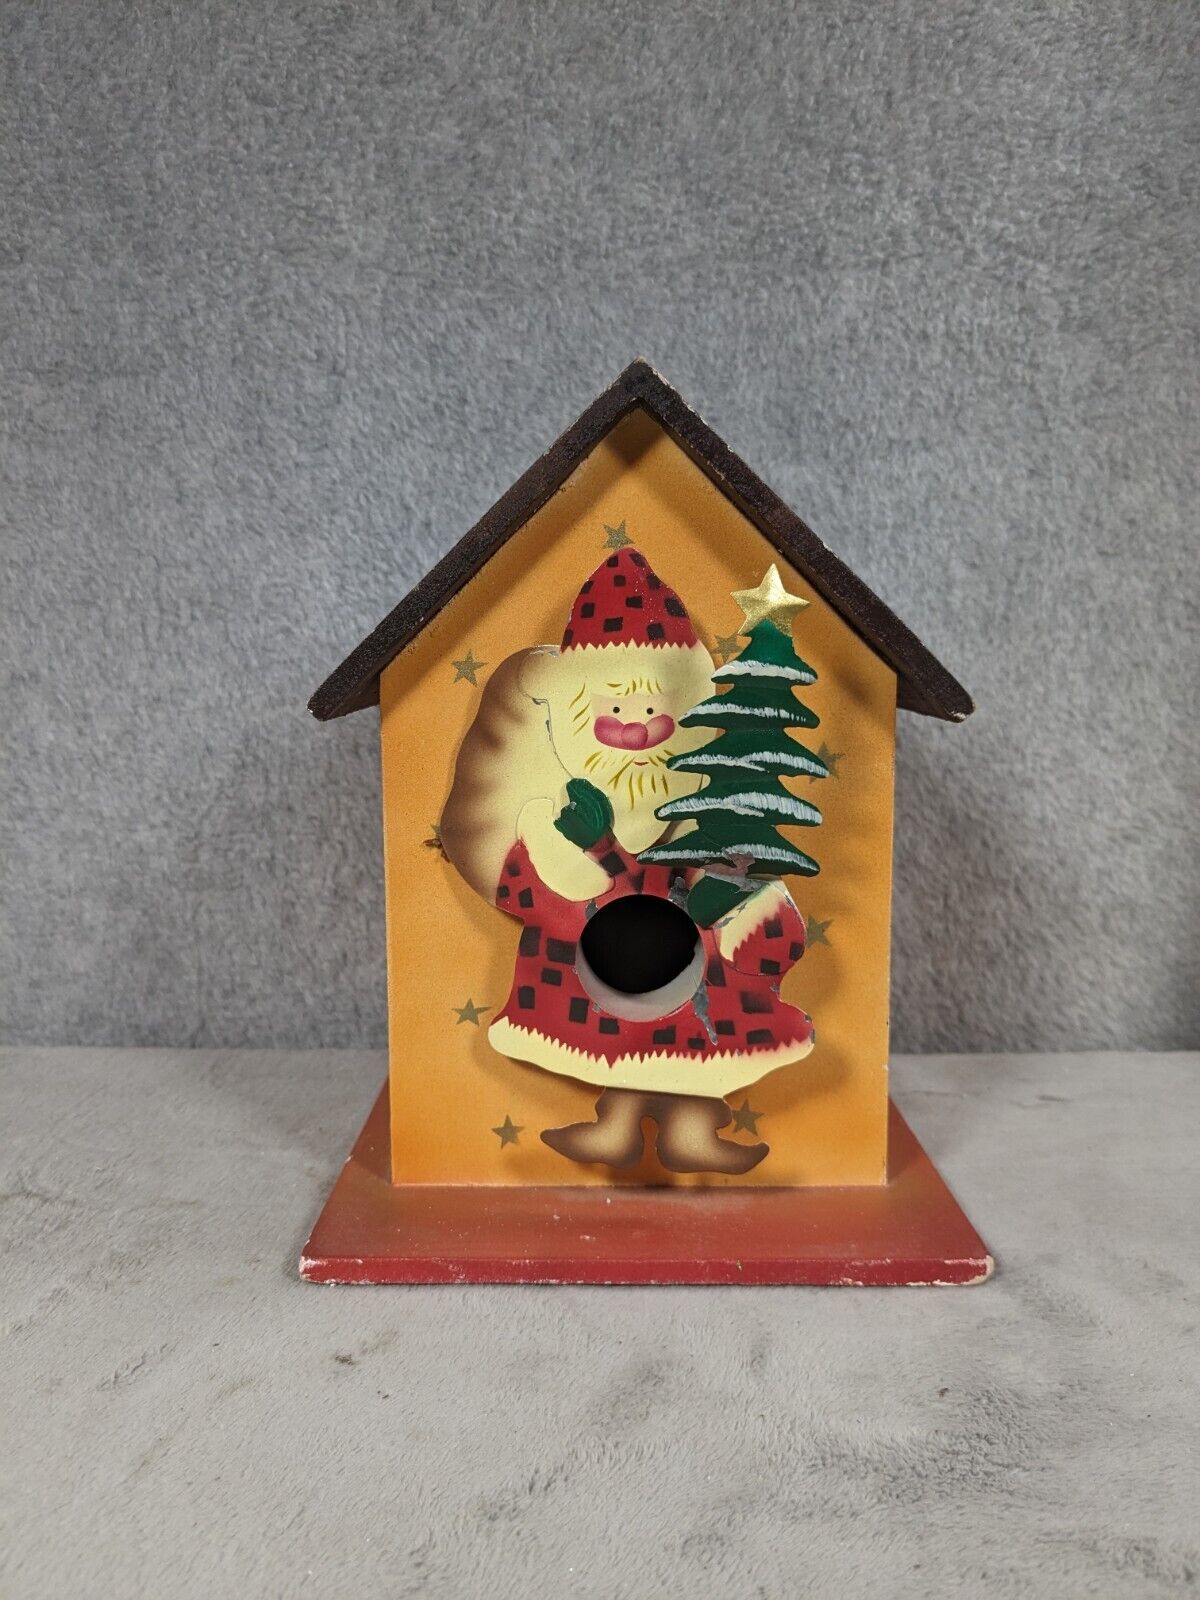 Vintage Christmas Holiday Birdhouse With Hand Painted Santa Holding a Tree